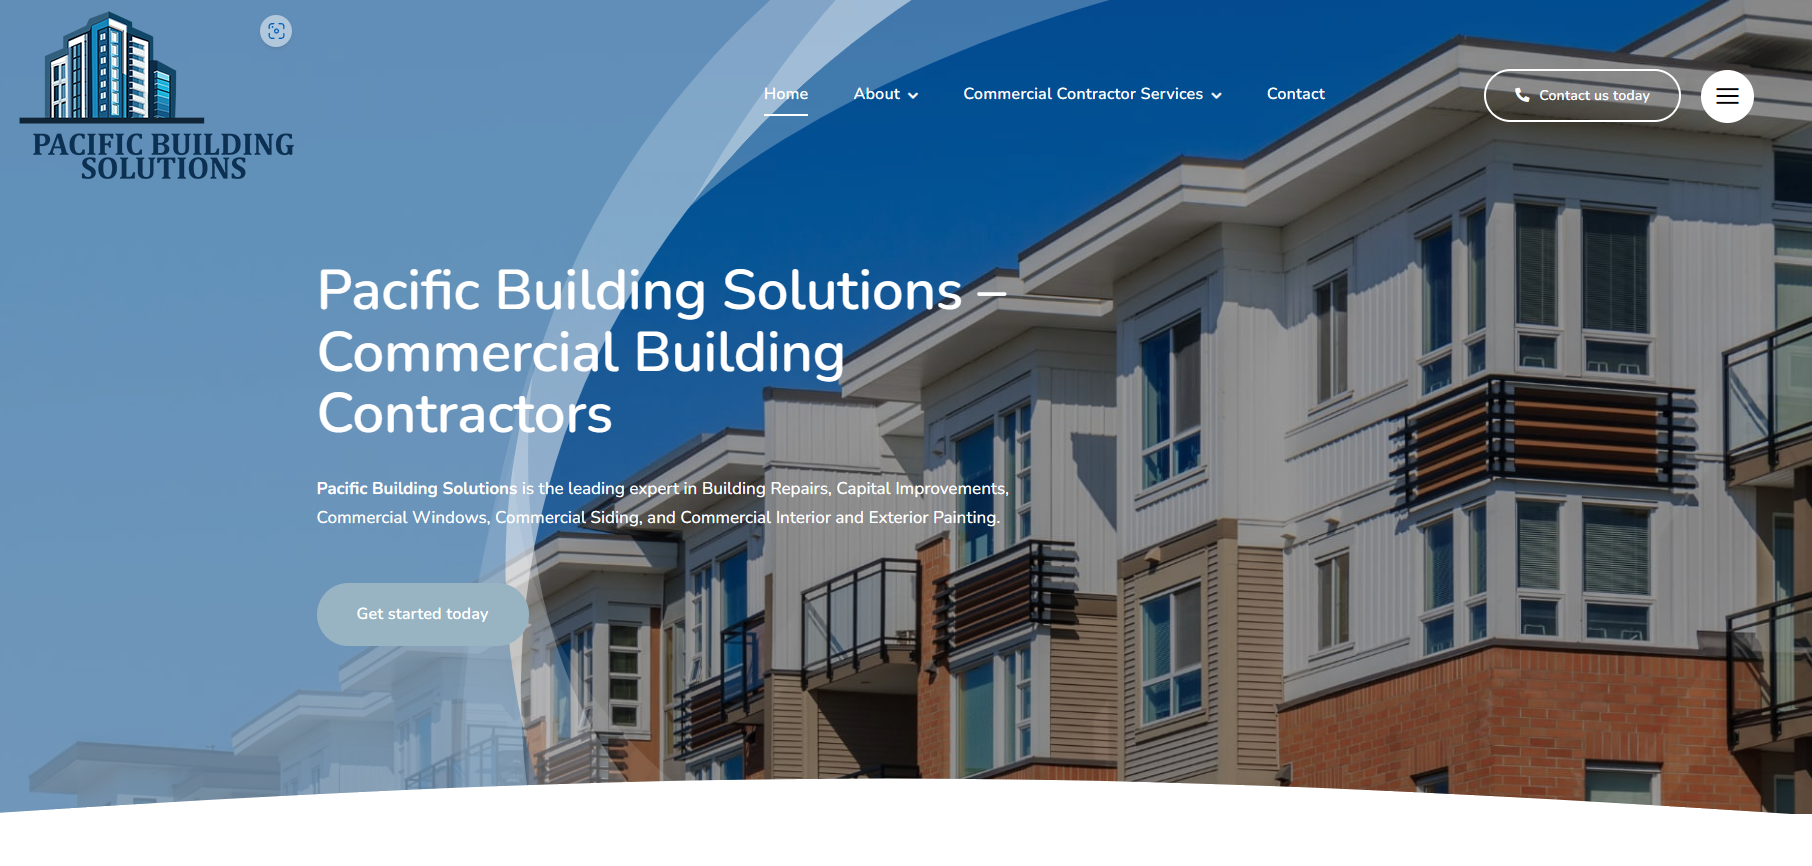 Pacific Building Solutions